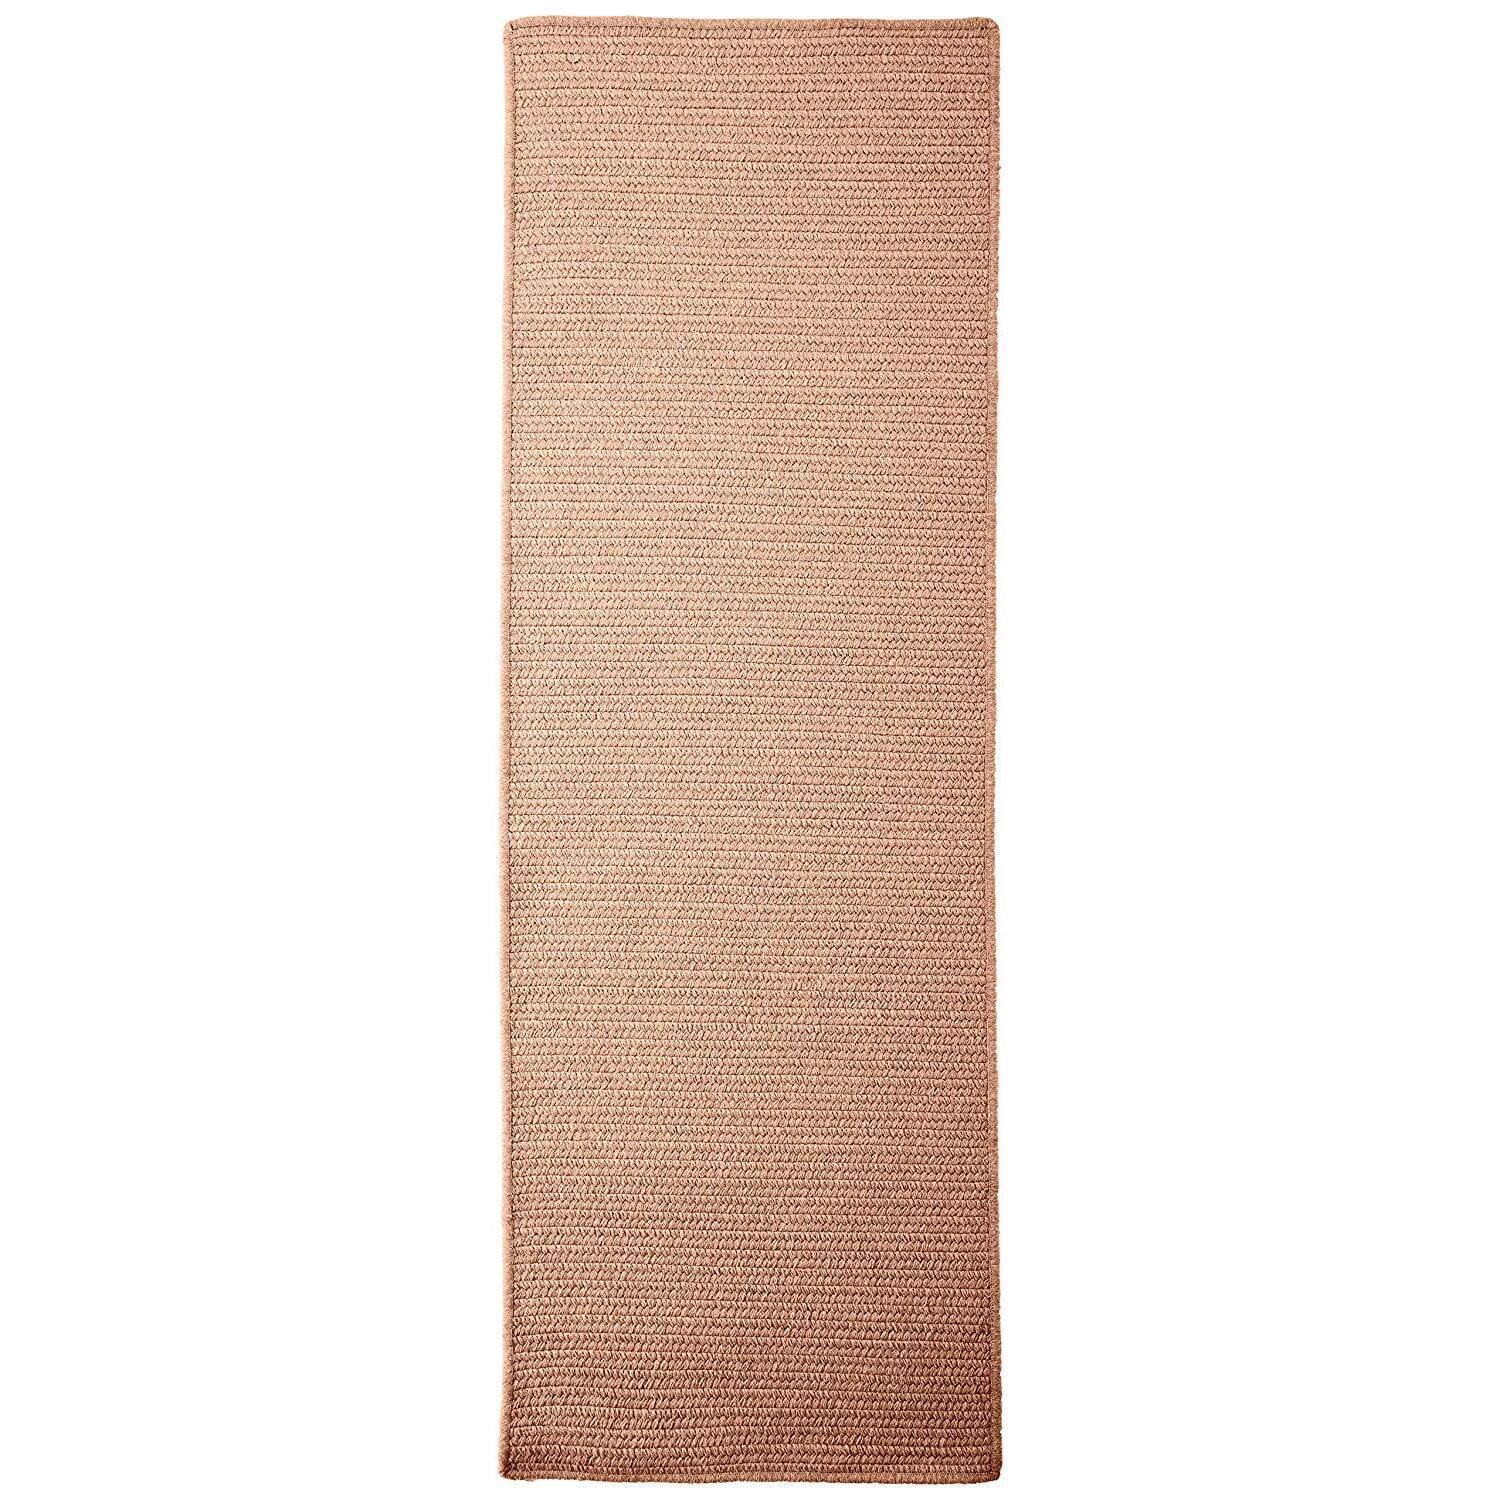 ALAZA Strawberry Pink Summer Area Rug Rugs for Living Room Bedroom 5'3x4' 